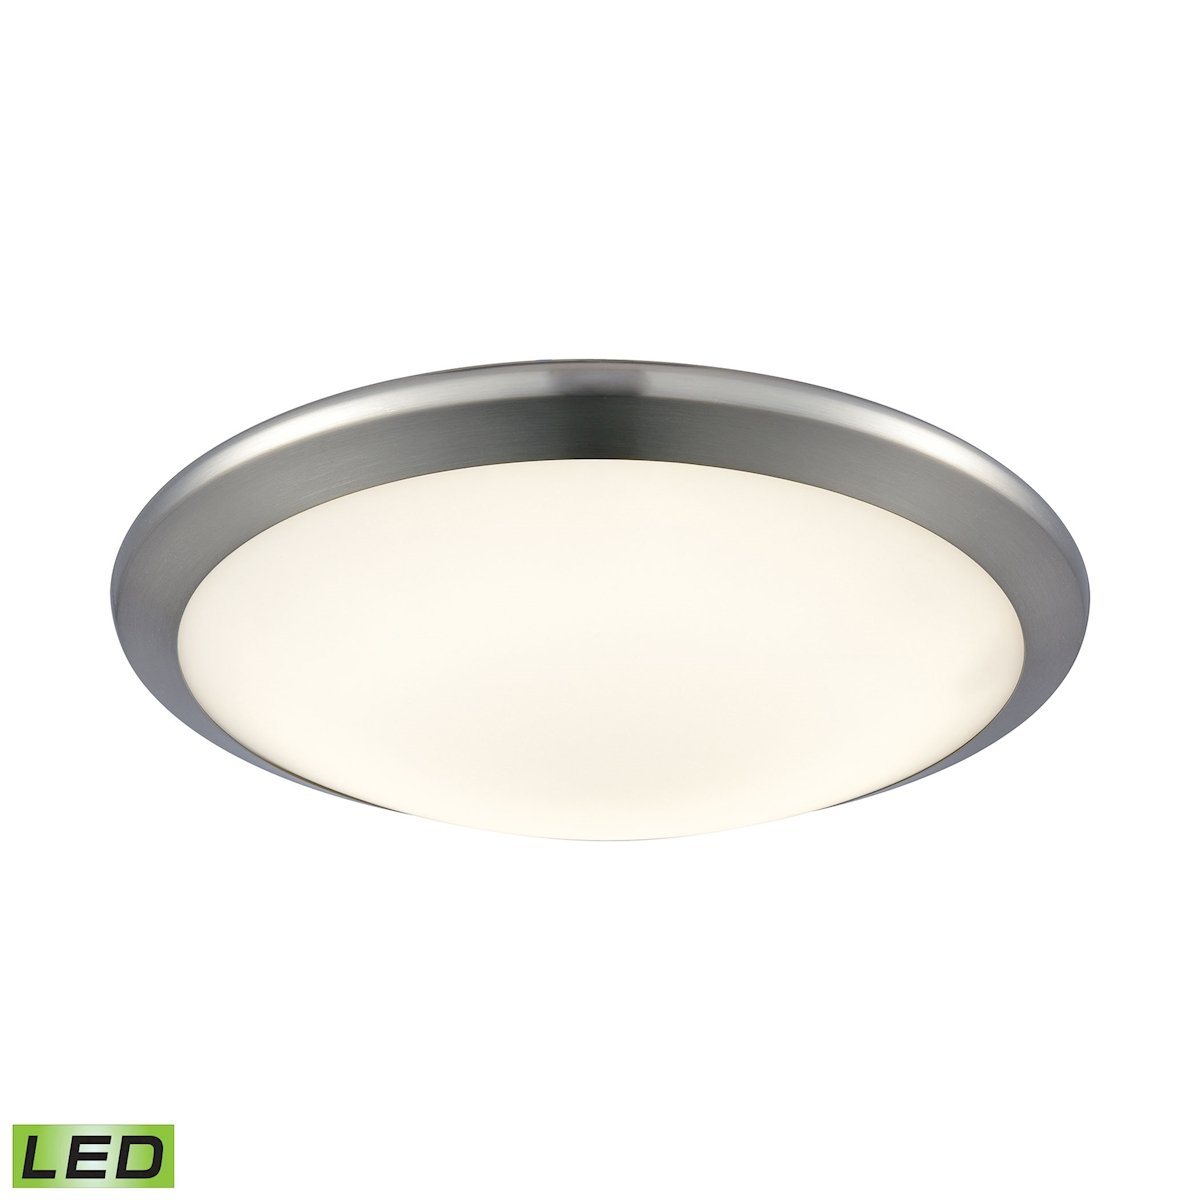 Clancy Round LED Flushmount In Chrome And Opal Glass - Small Flush Mount Elk Lighting 